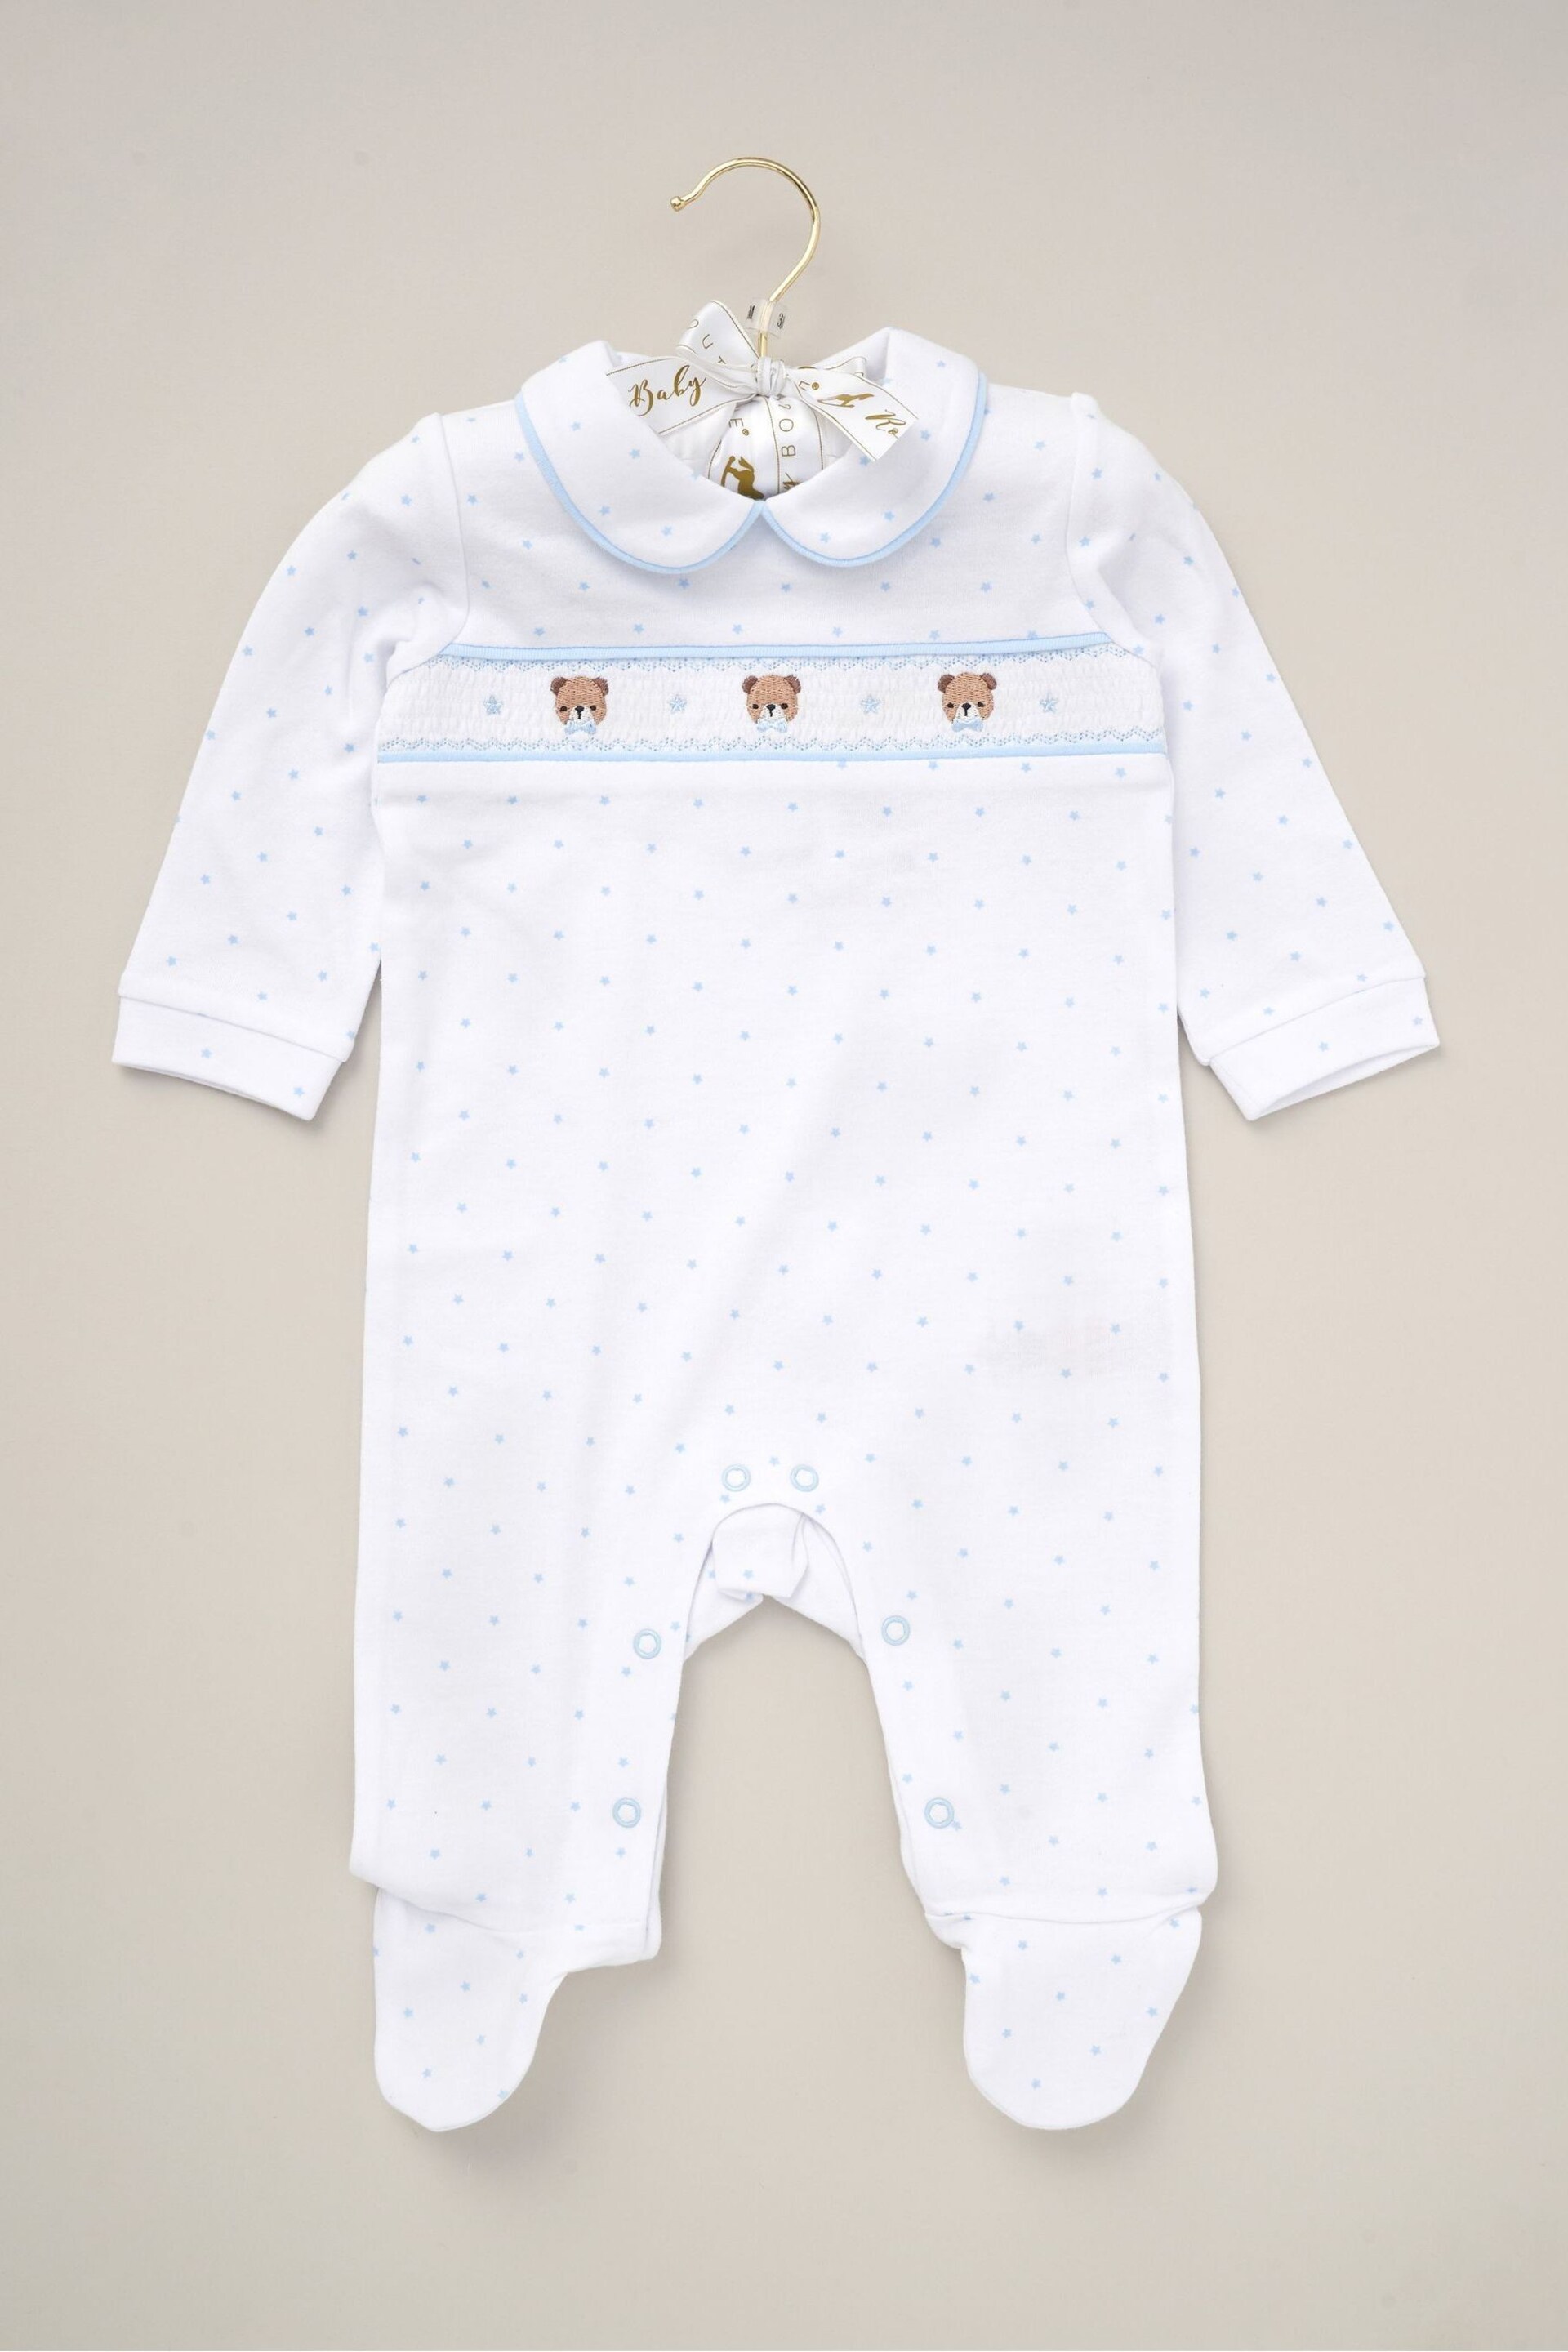 Rock-A-Bye Baby Boutique Blue Mock Waistcoat All-in-One Sleepsuit - Image 1 of 3